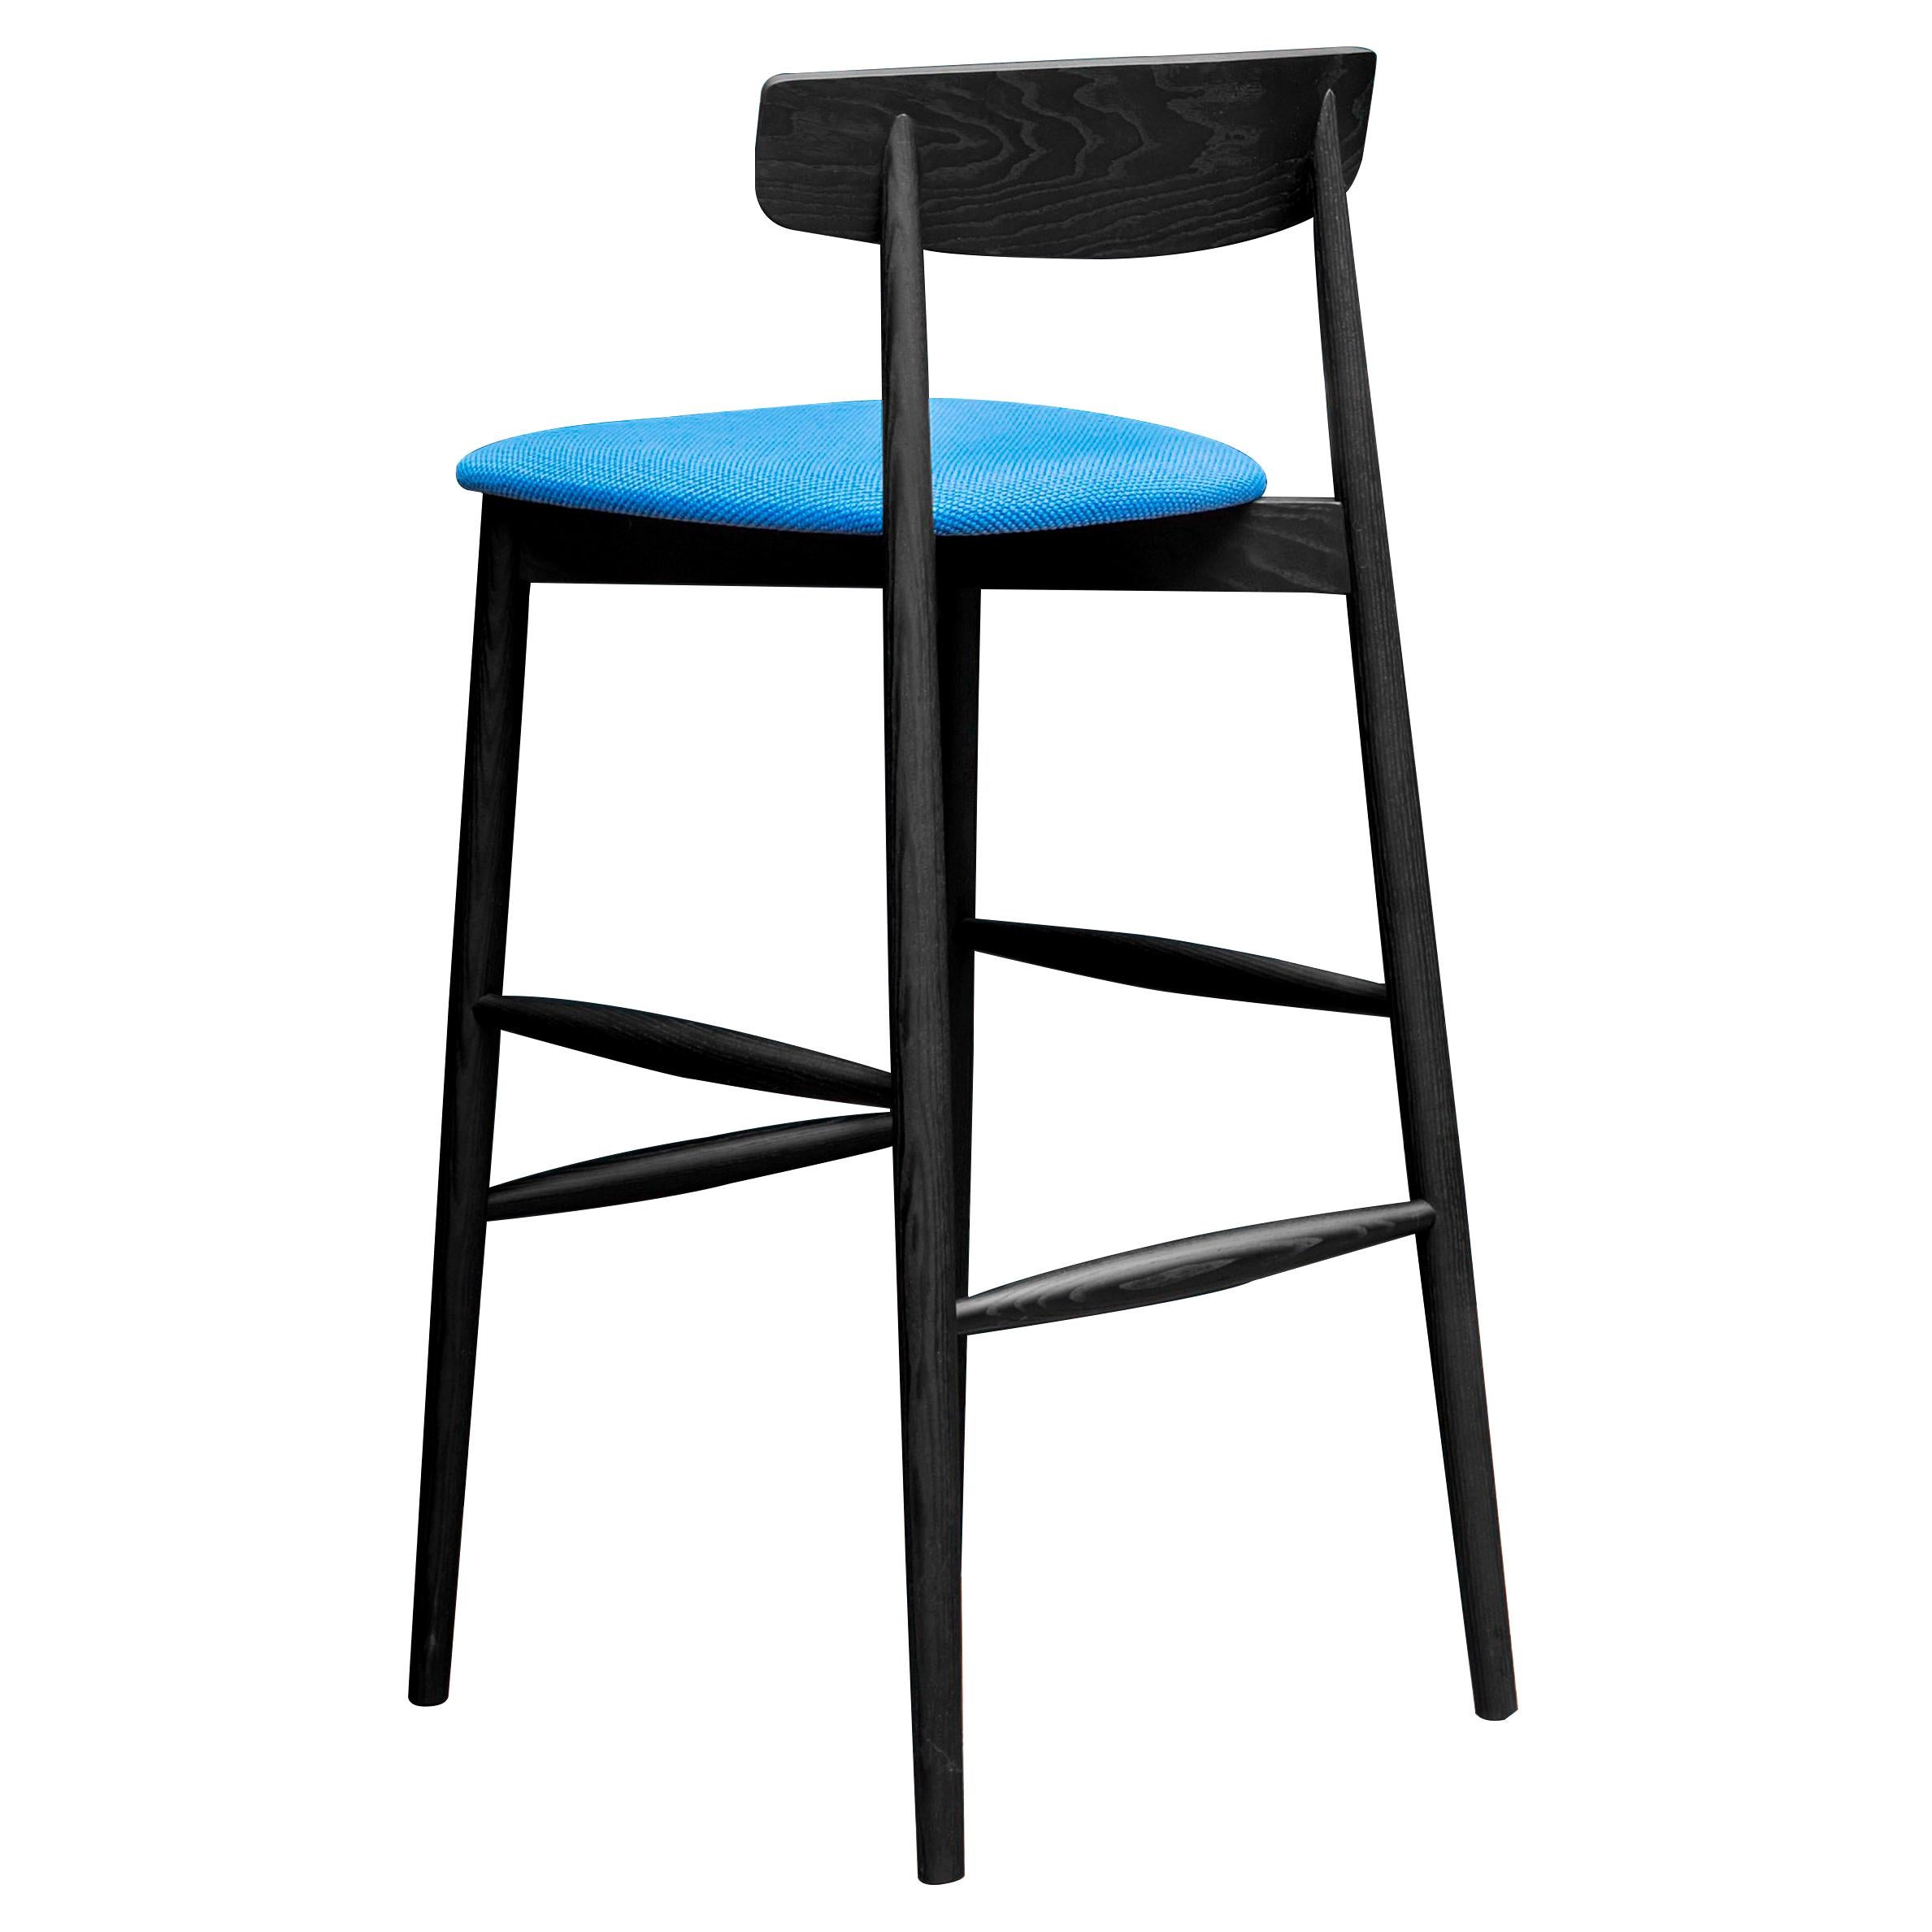 Claretta Large Stool in Tanimo Ultramarine Blue Upholstery with Black Ash Frame